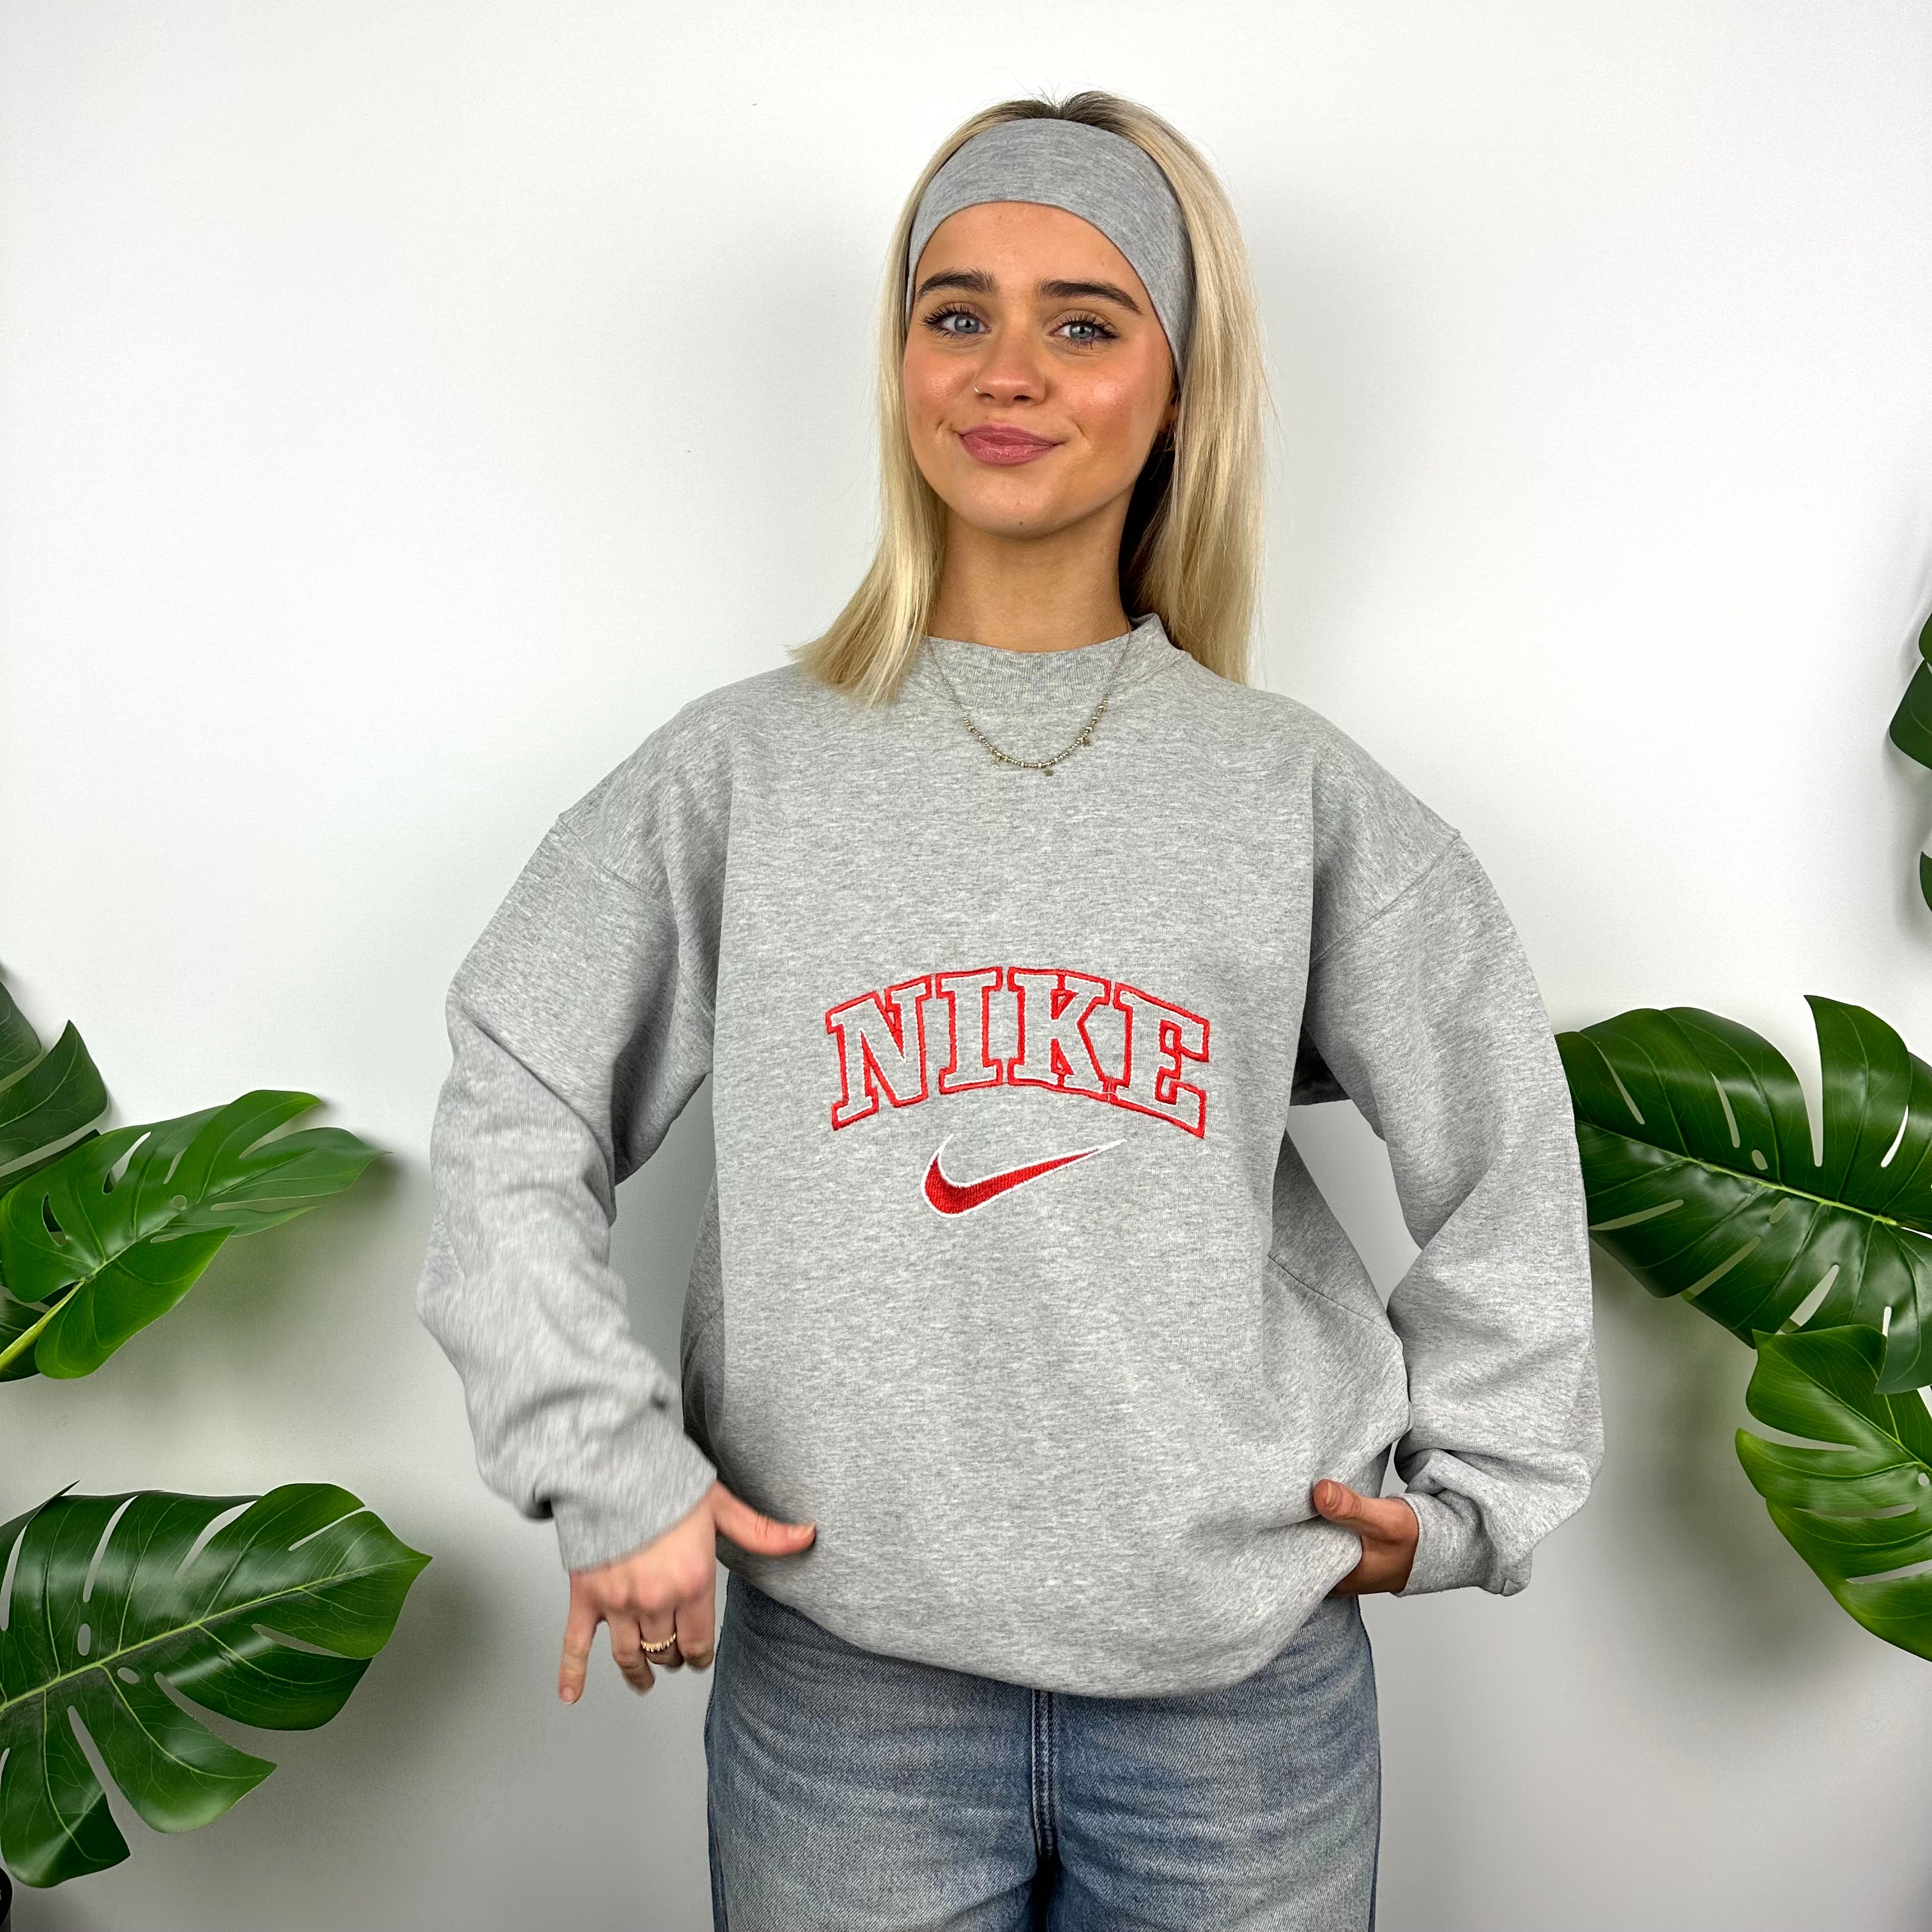 Nike Grey Embroidered Spell Out Sweatshirt (M)